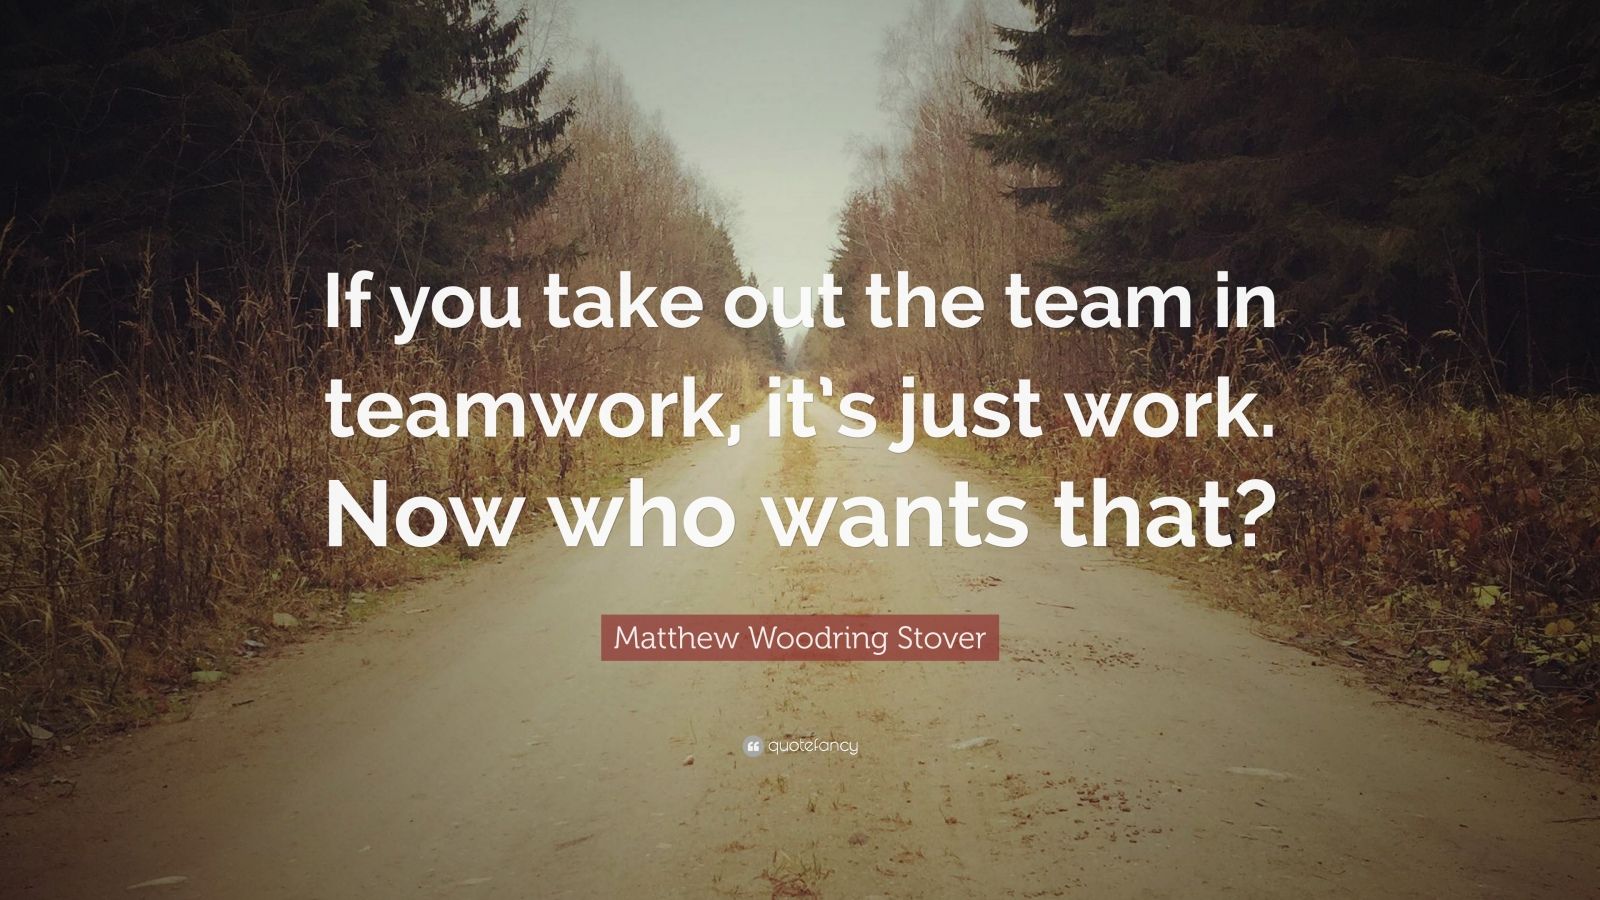 Matthew Woodring Stover Quote: “If you take out the team in teamwork ...